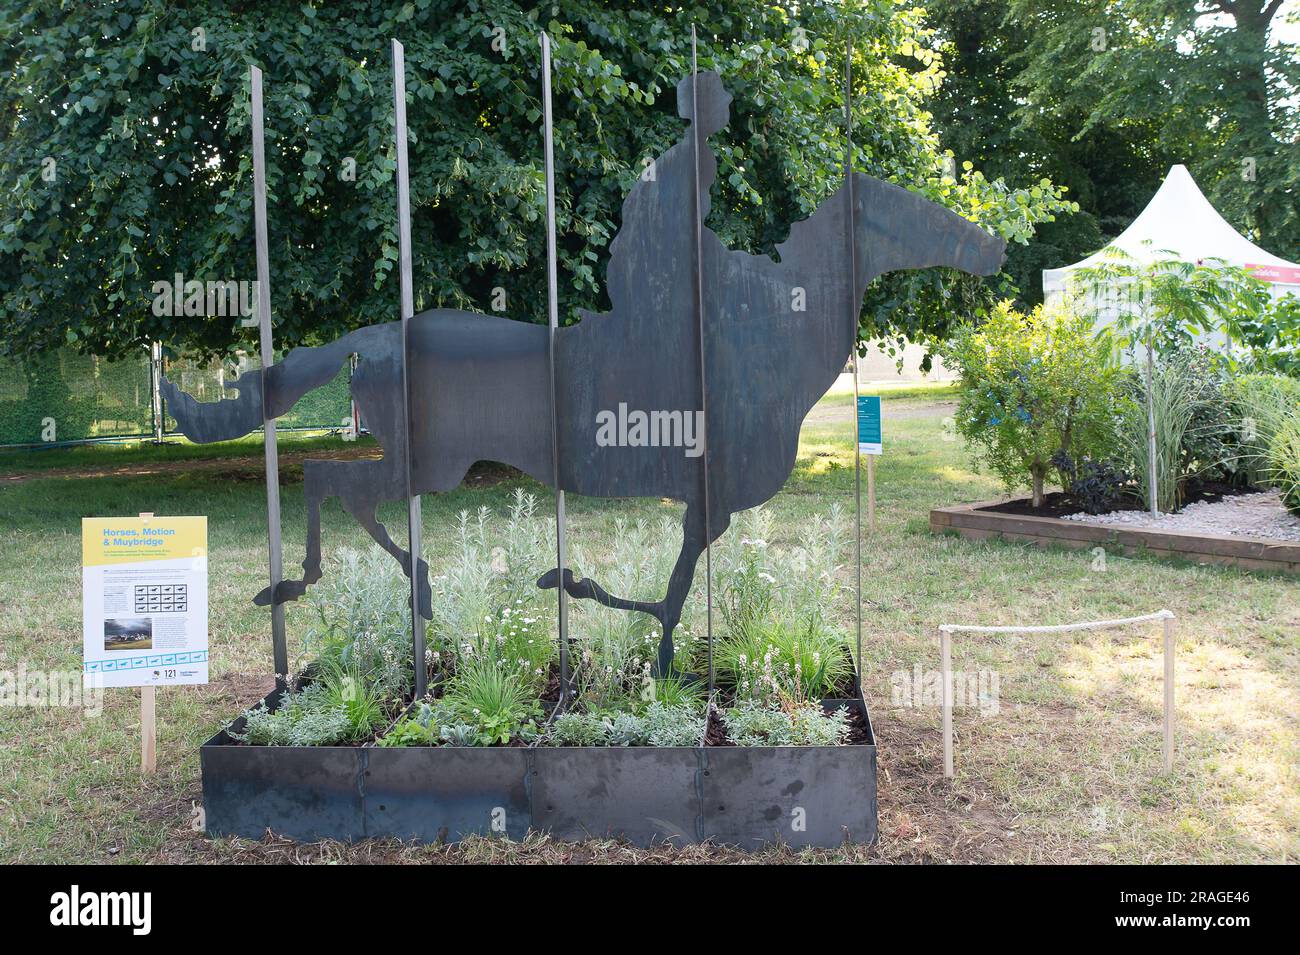 East Molesey, Surrey, UK. 3rd July, 2023. The Horses, Motion & Muybridge Garden at the RHS Hampton Court Palace Garden Festival. The garden is a partnership between The Community Brain, 121 Collective and South Western Railway. Credit: Maureen McLean/Alamy Live News Stock Photo